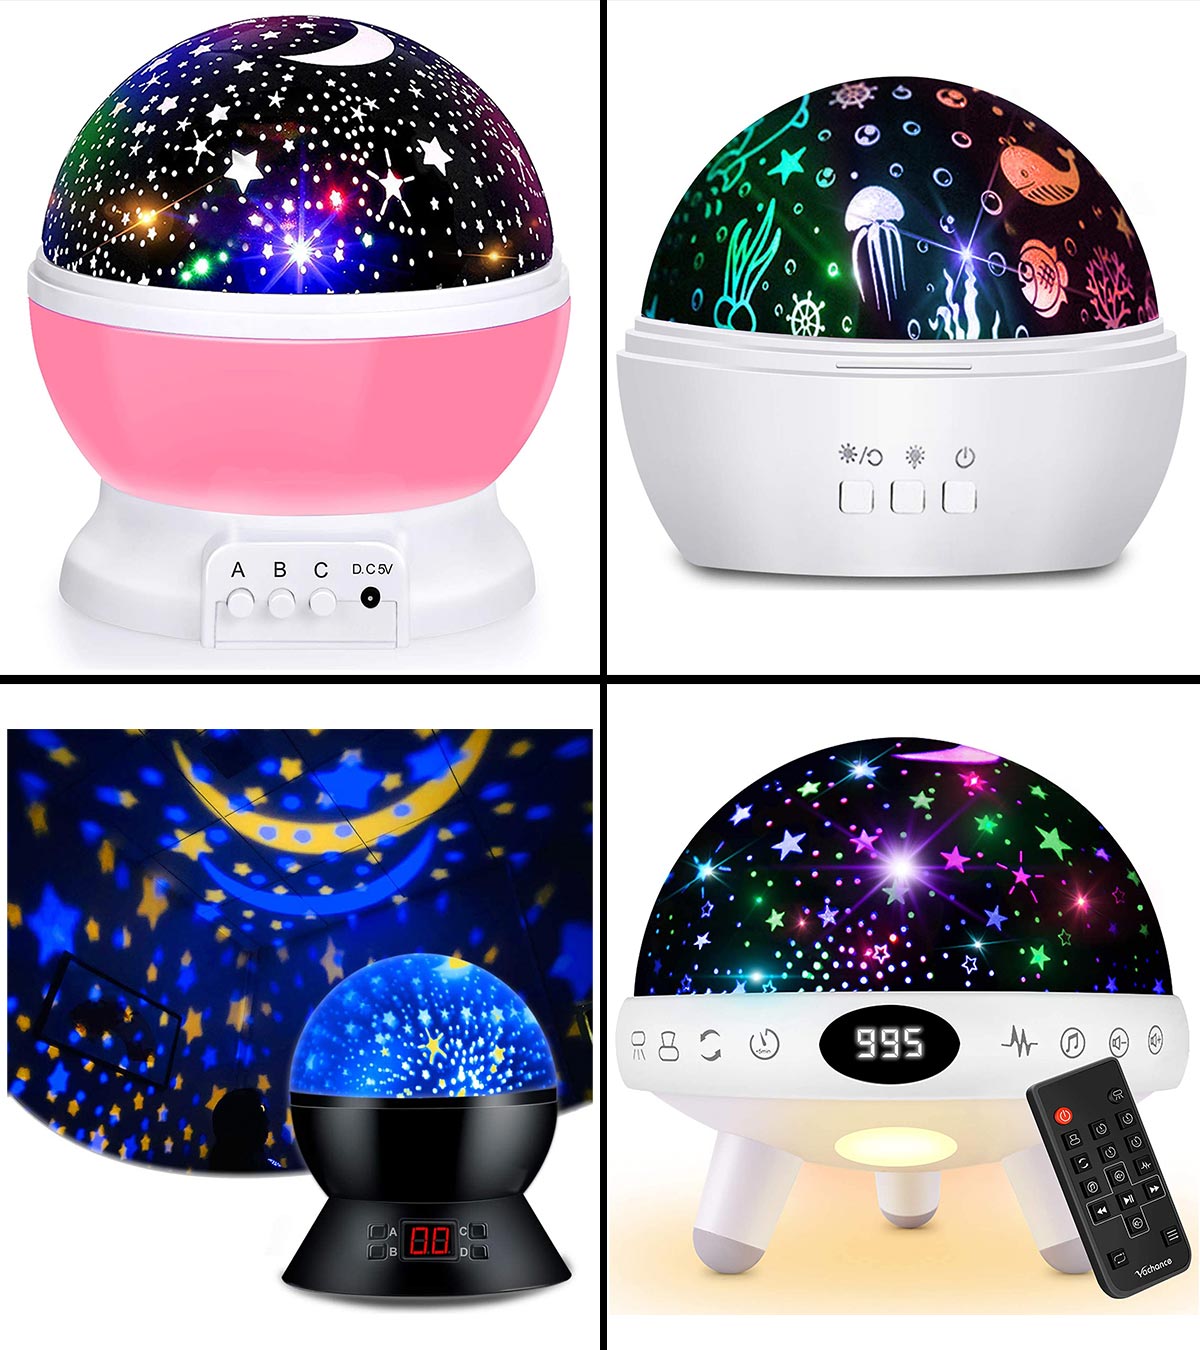 Moredig Star Projector LED Night Light Baby Night Light For Kids And Babies 